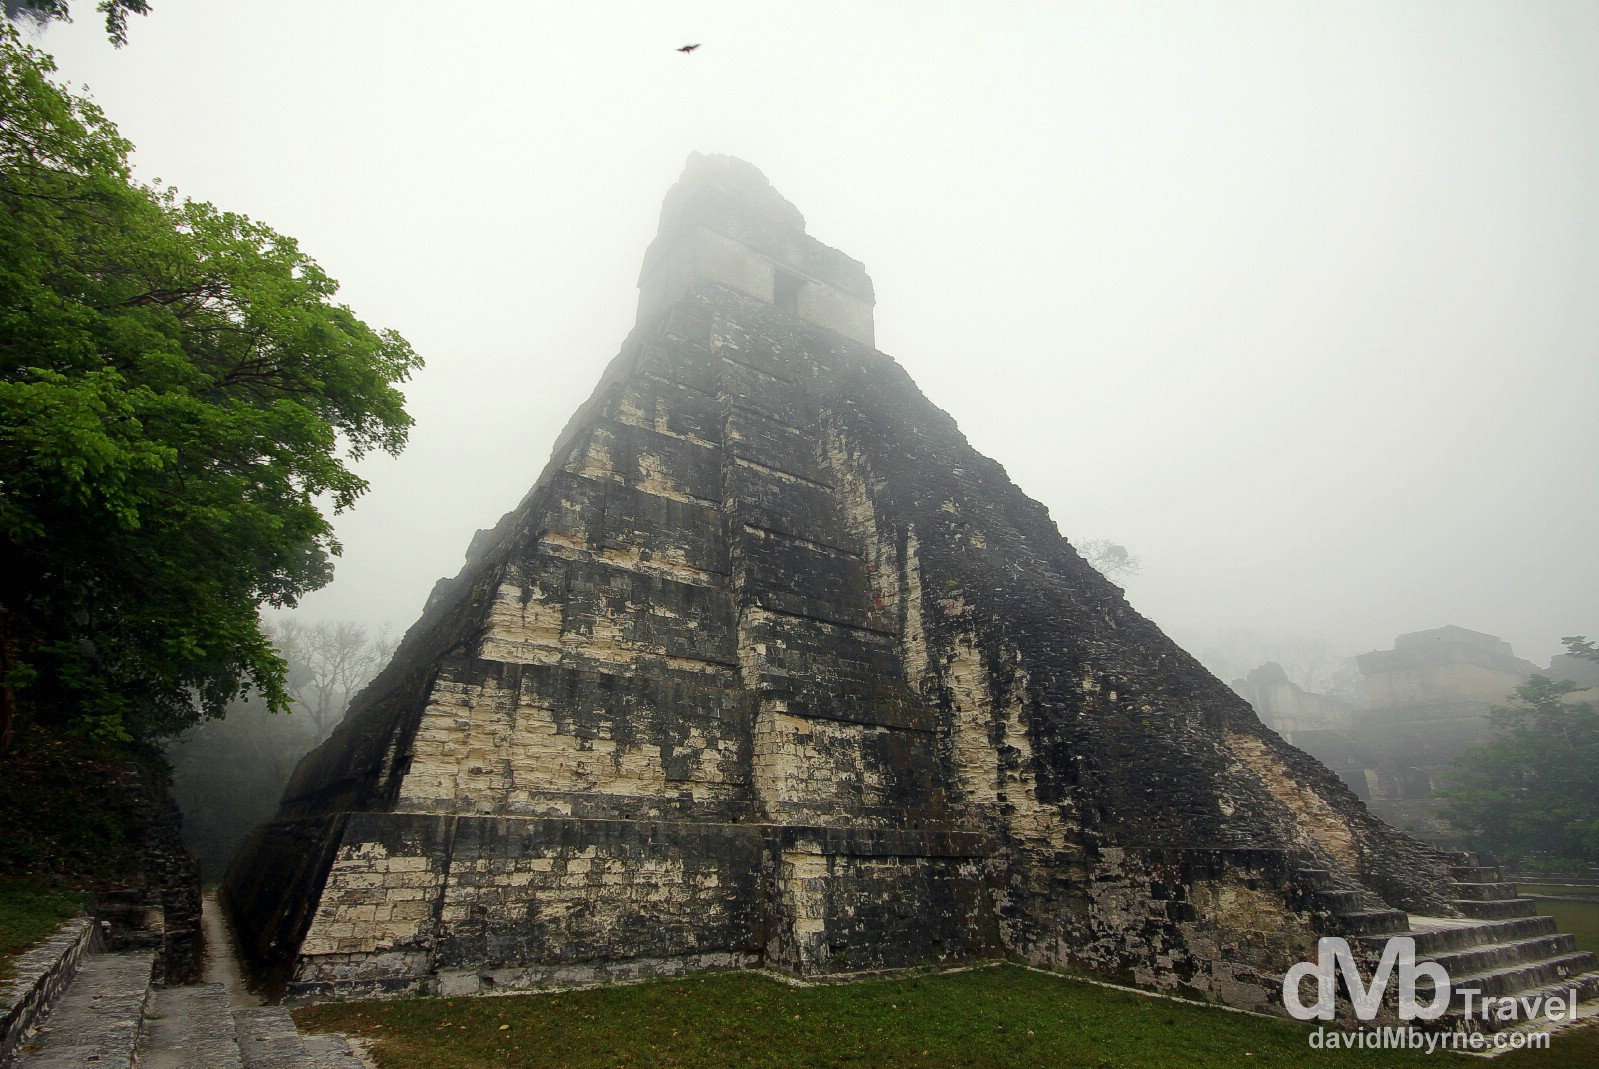 Pre sunrise mist covers the top of Temple 1, Temple of the Grand Jaguar, in the The Gran Plaza, Tikal Mayan ruins, Tikal National Park, northern Guatemala. May 17th 2013.